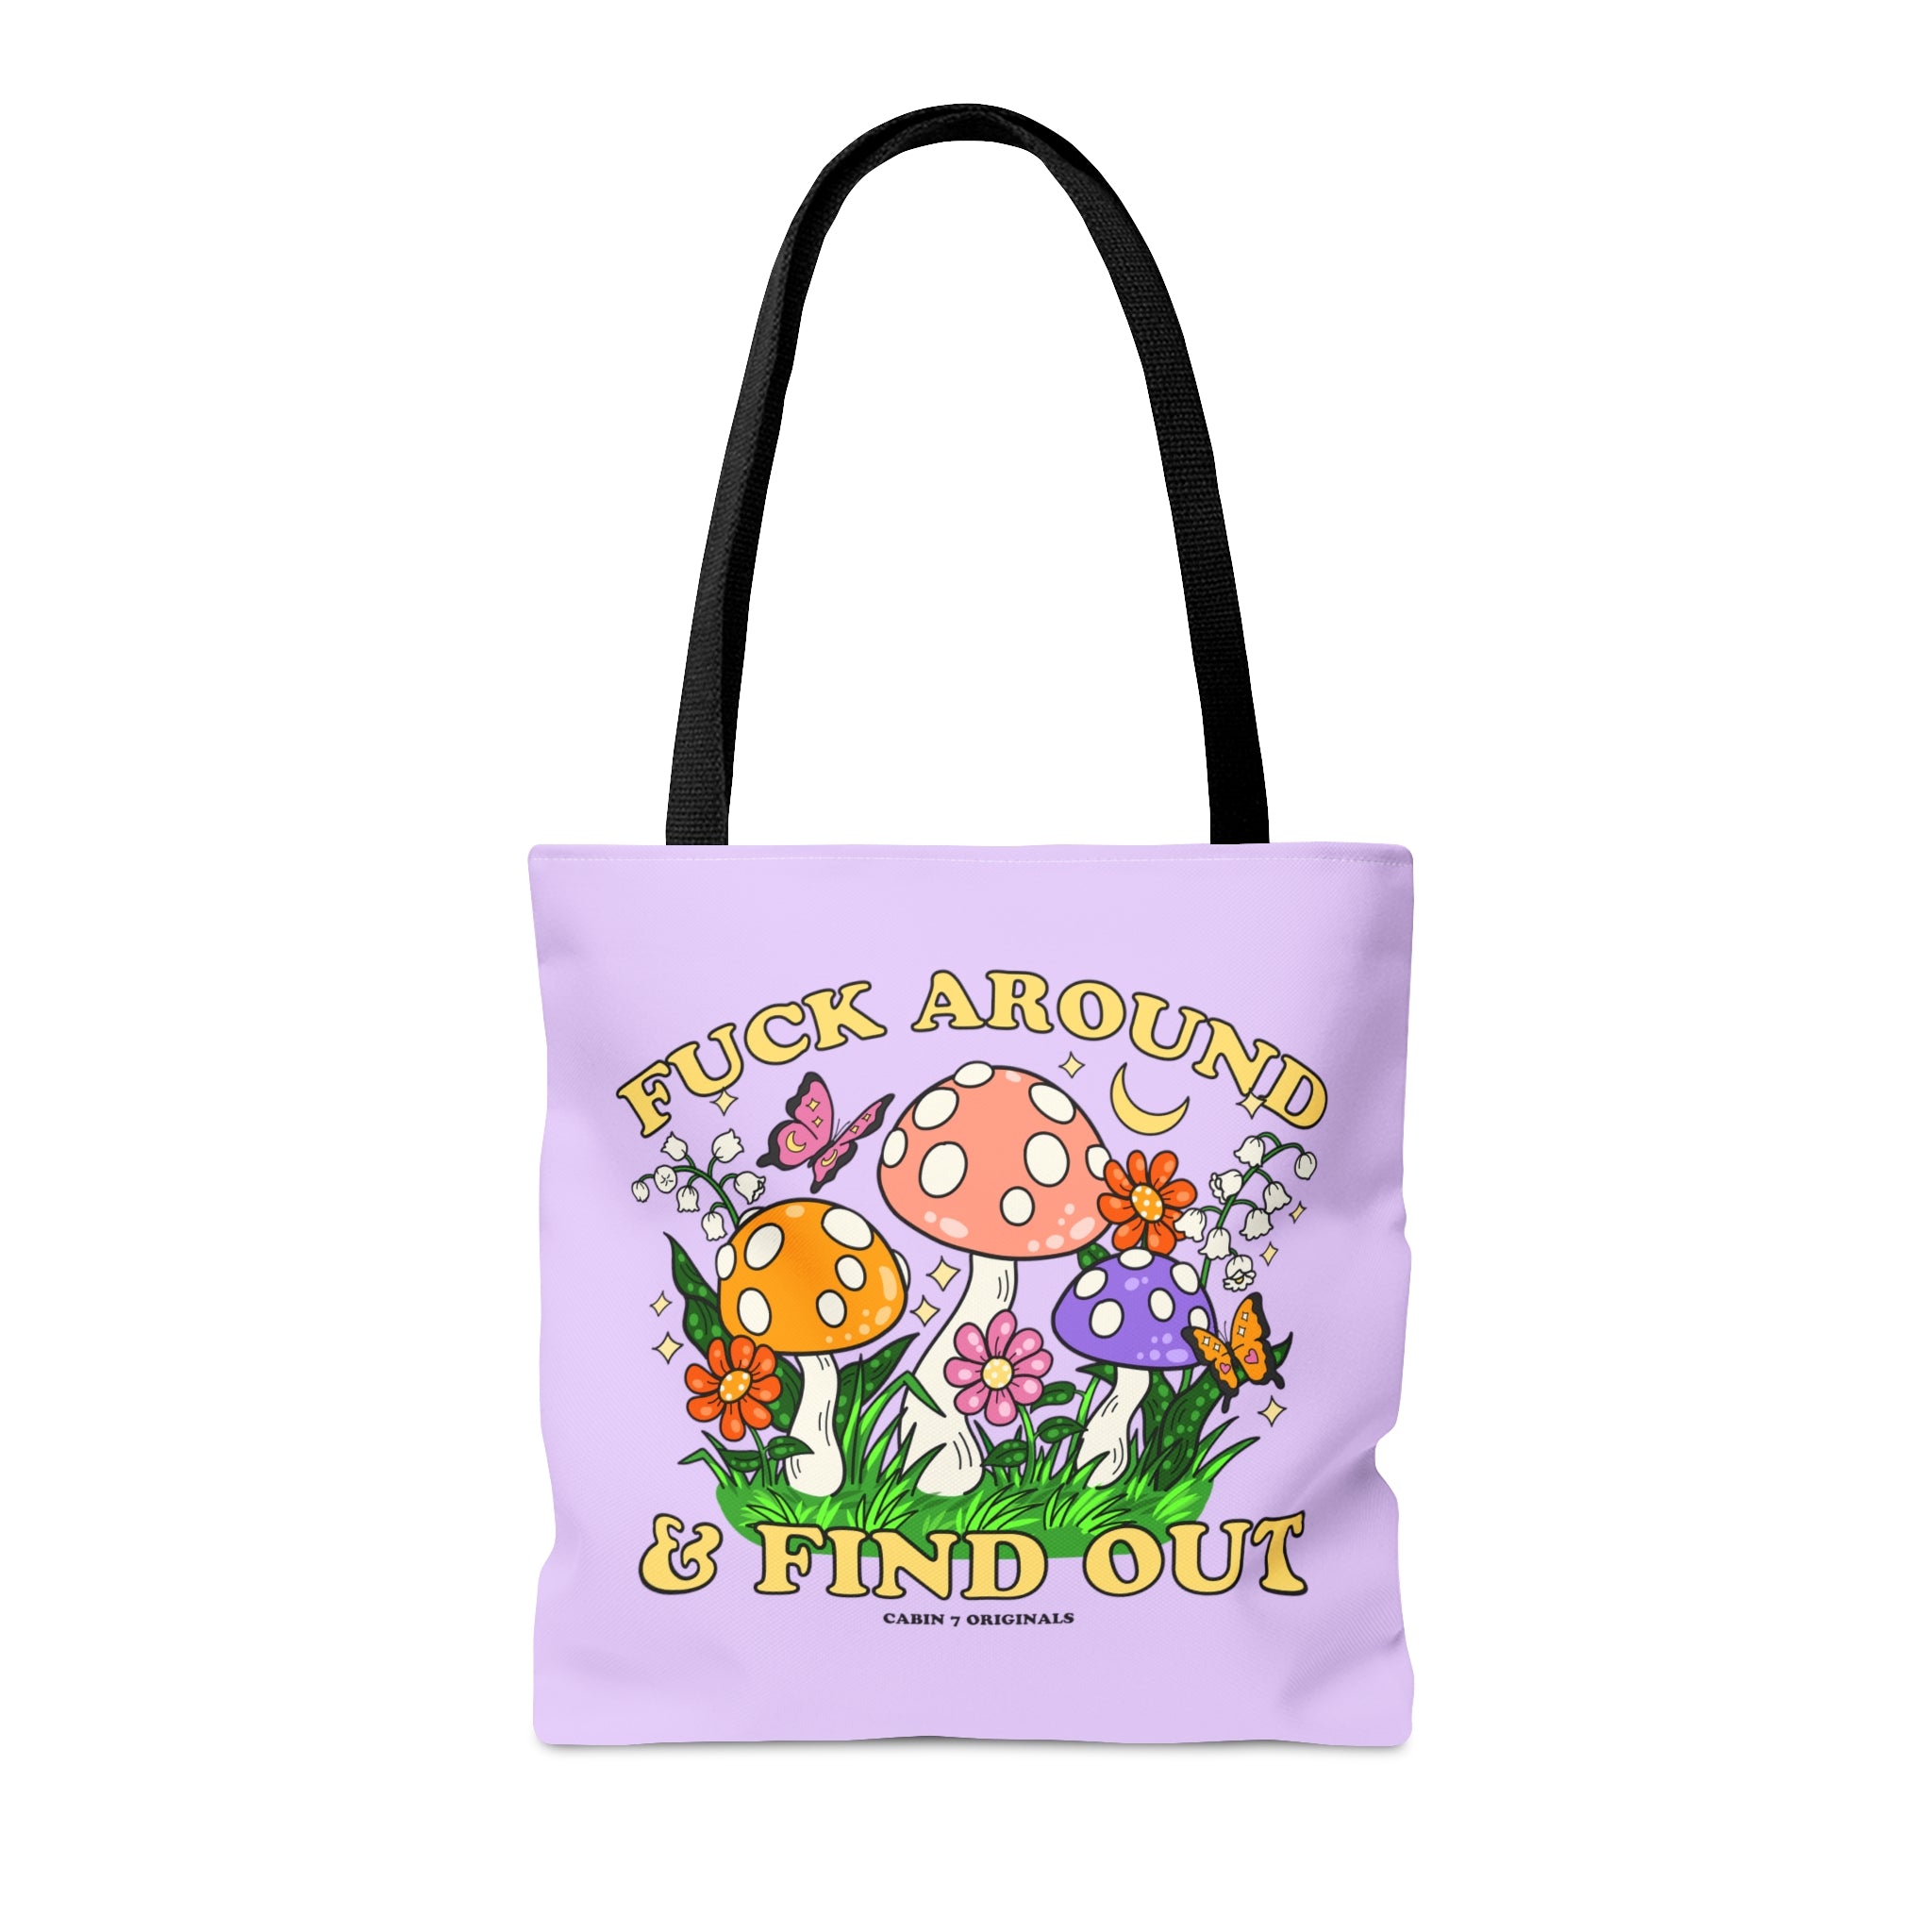 Find Out Tote Bag